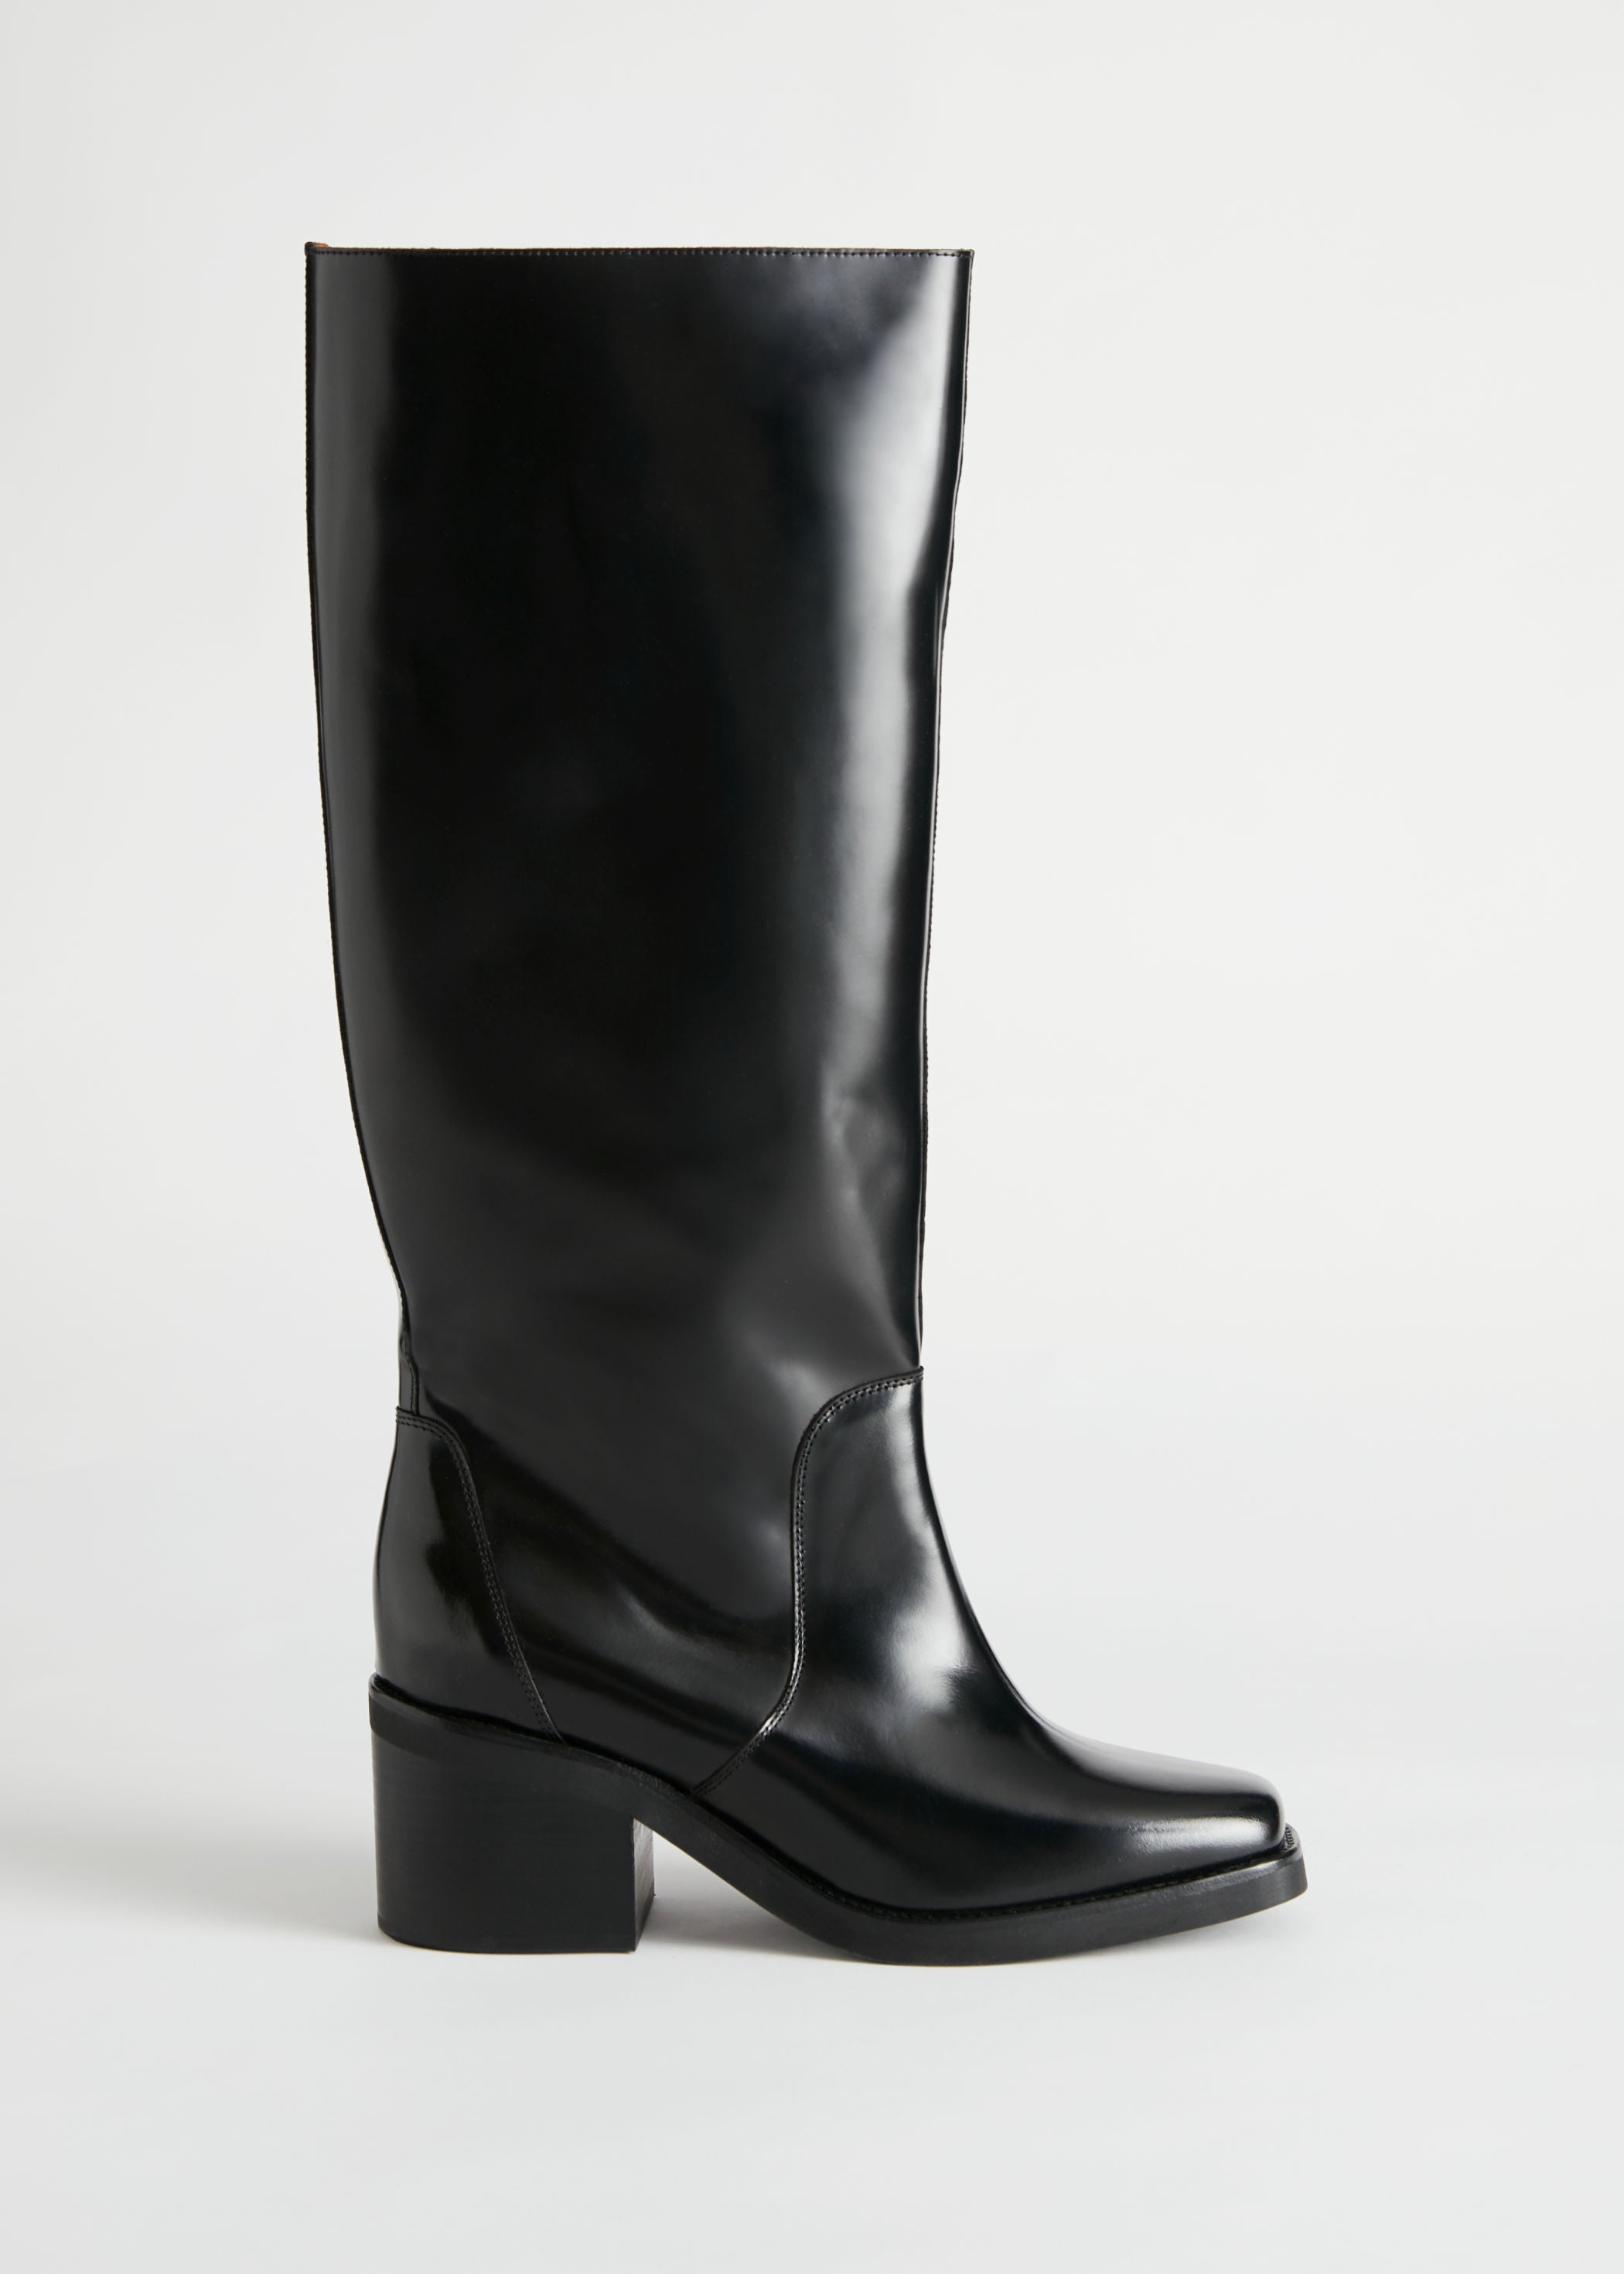 & other stories over the knee boots